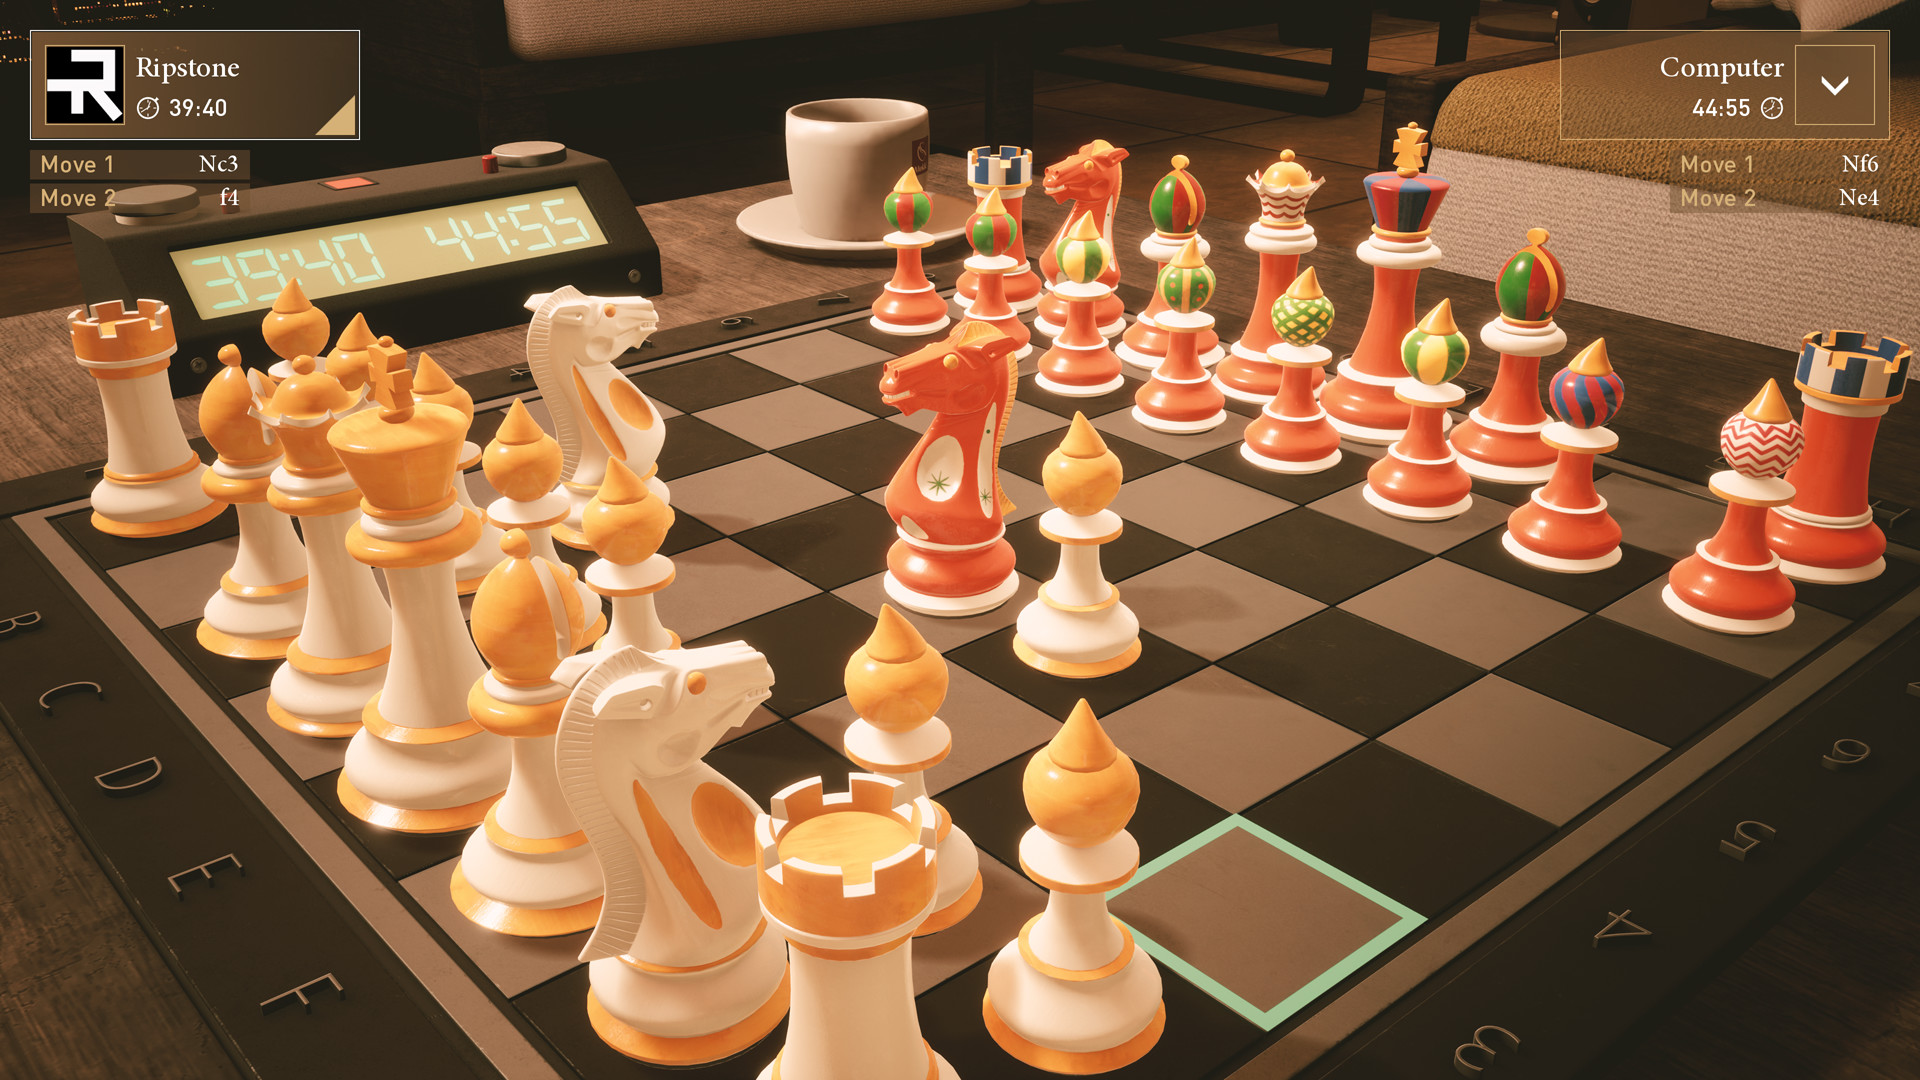 Chess Ultra X Purling London Bold Chess on Steam